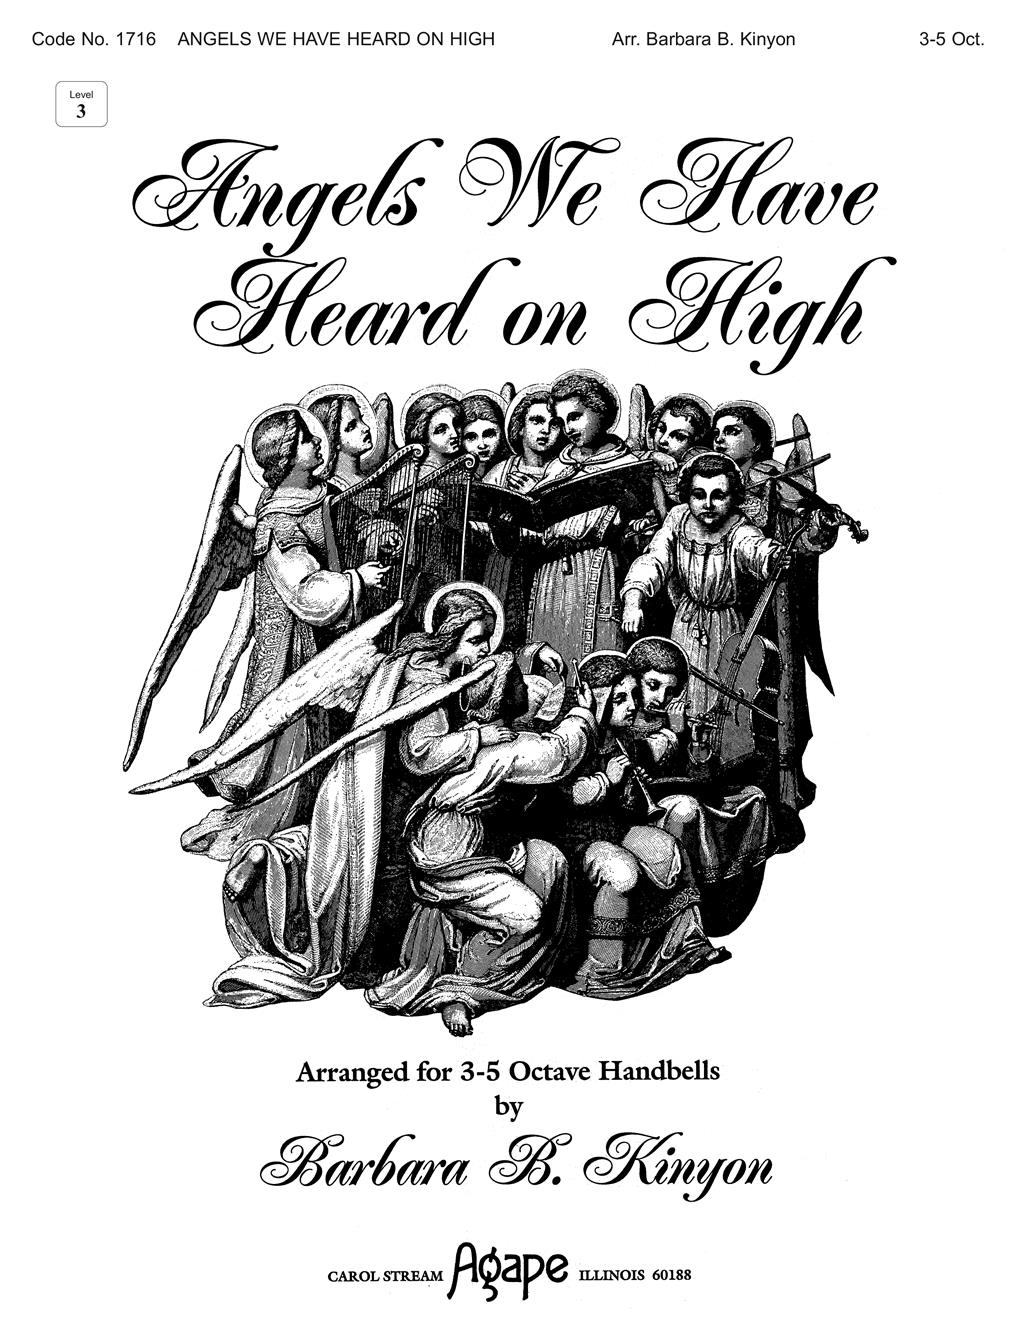 Angels We Have Heard on High - 3-5 Oct. Cover Image